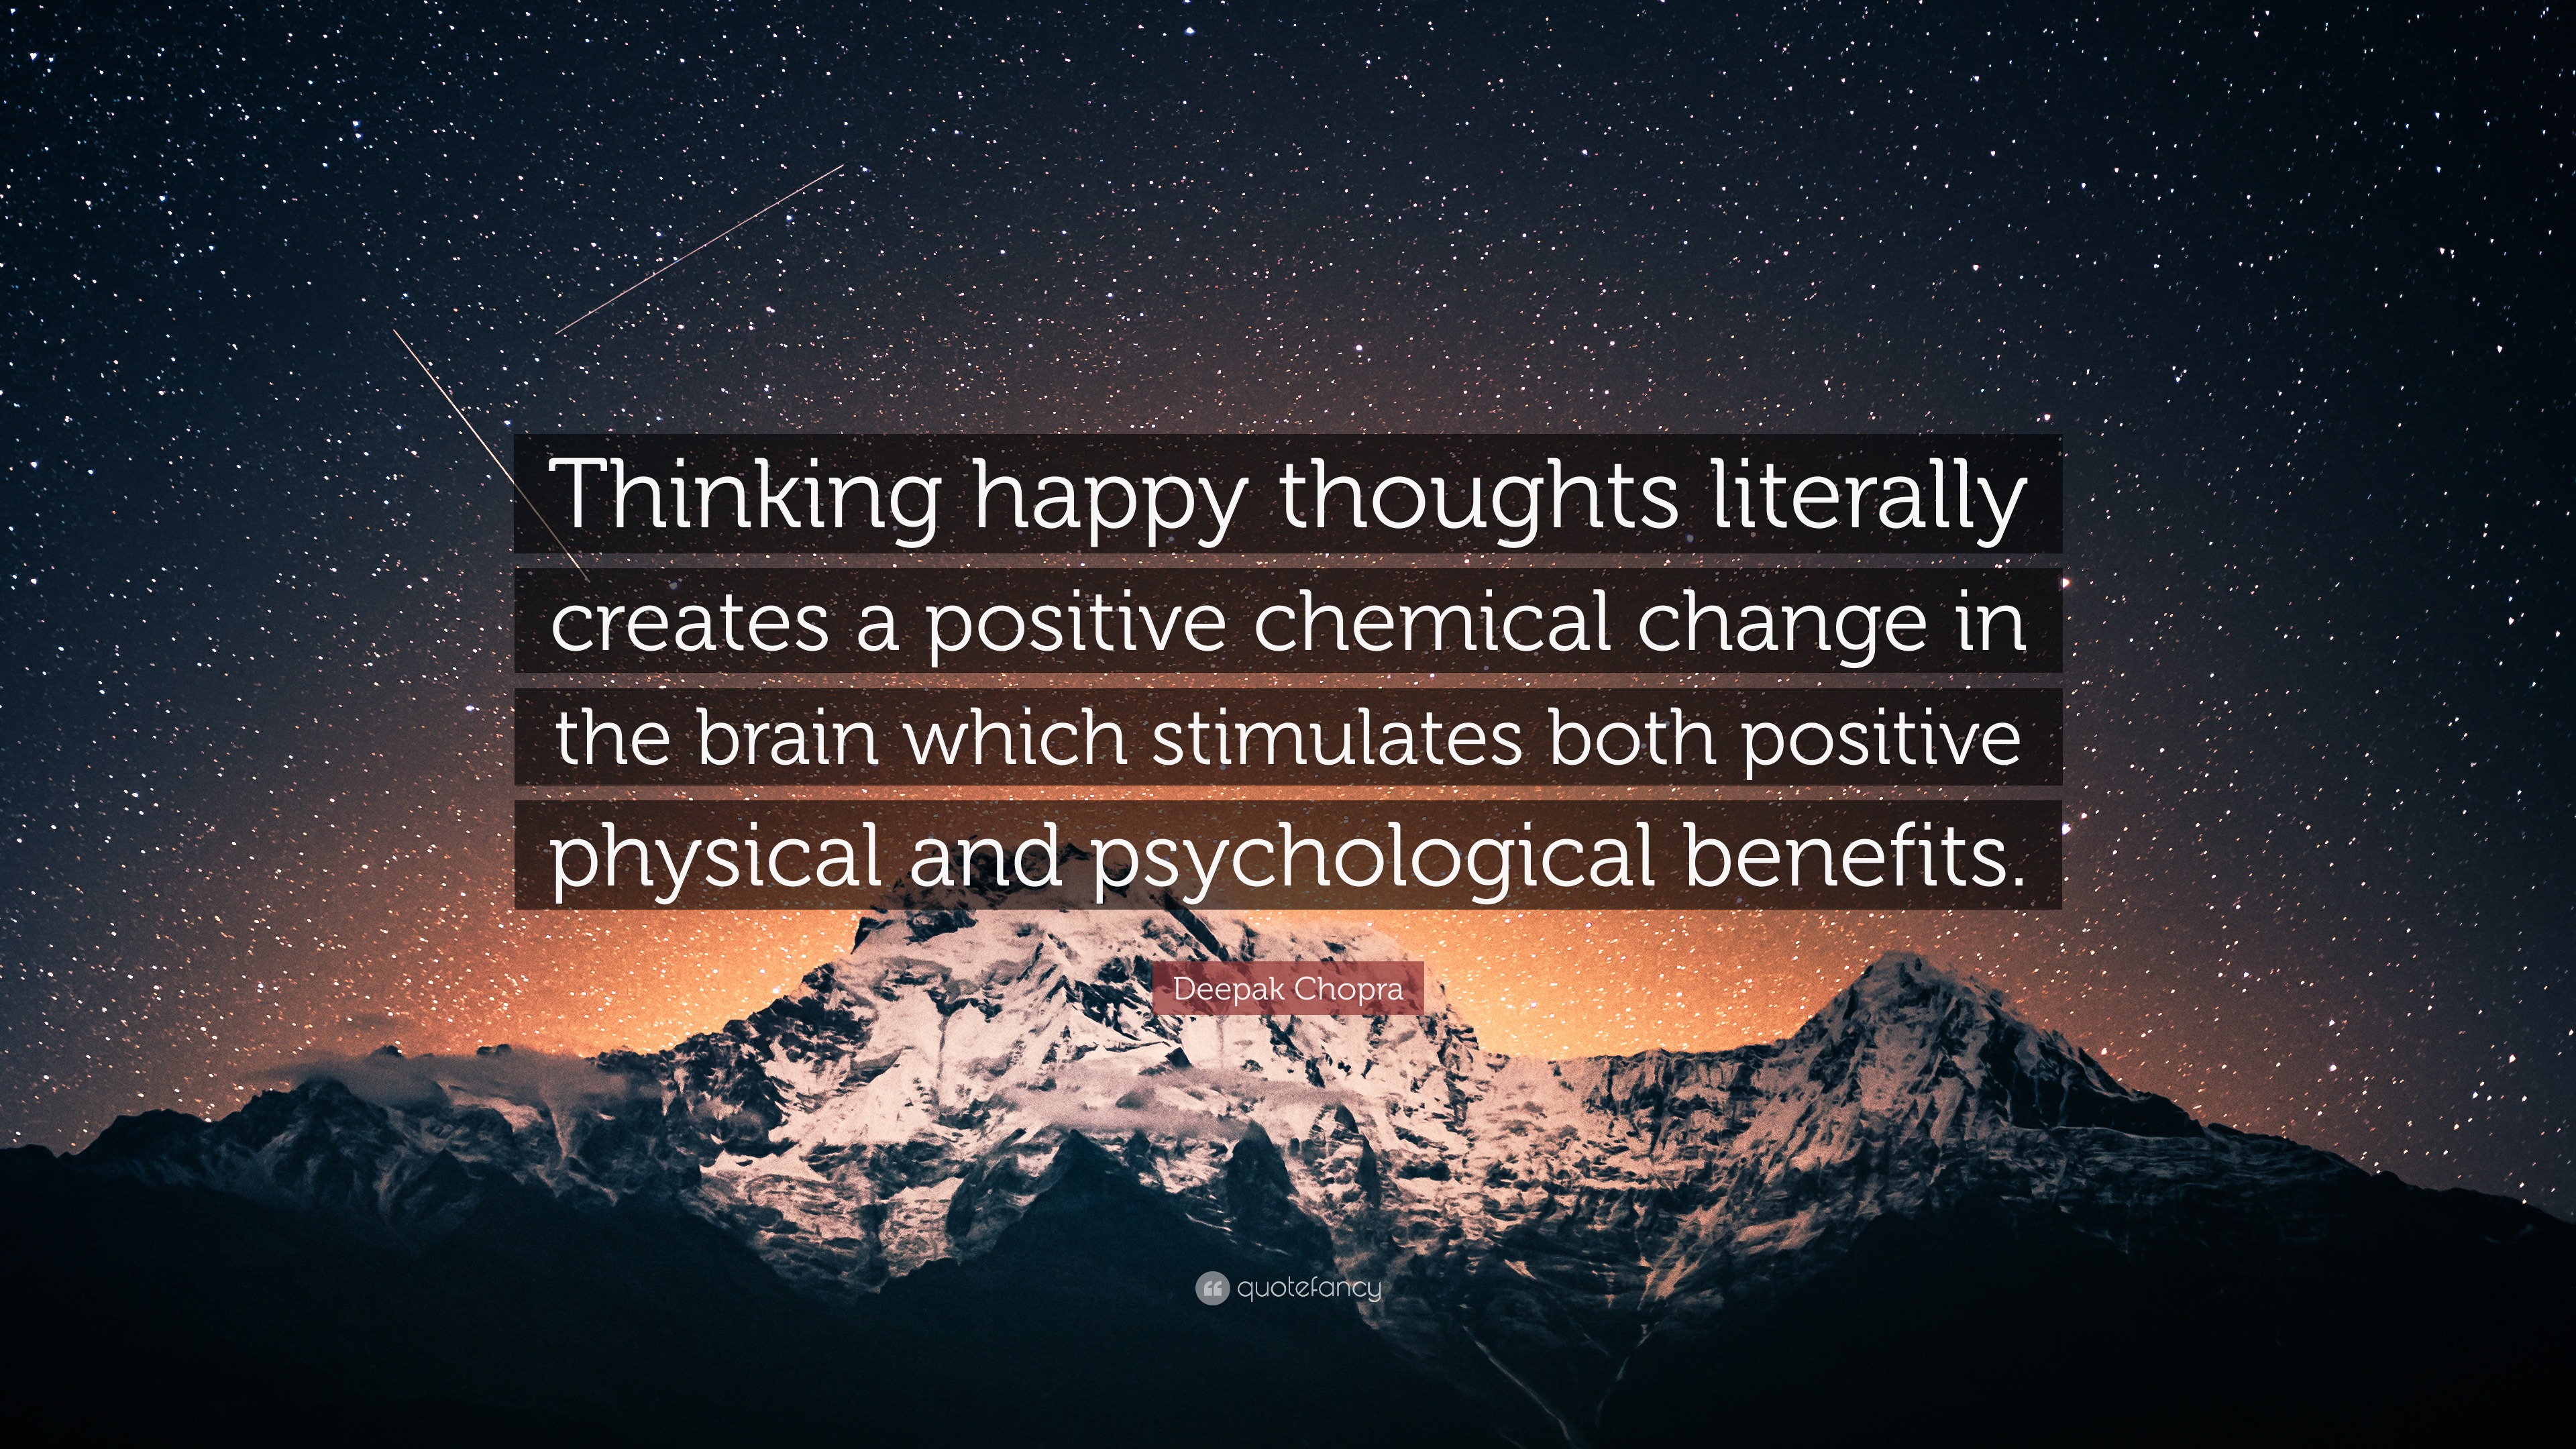 Deepak Chopra Quote: “Thinking happy thoughts literally creates a